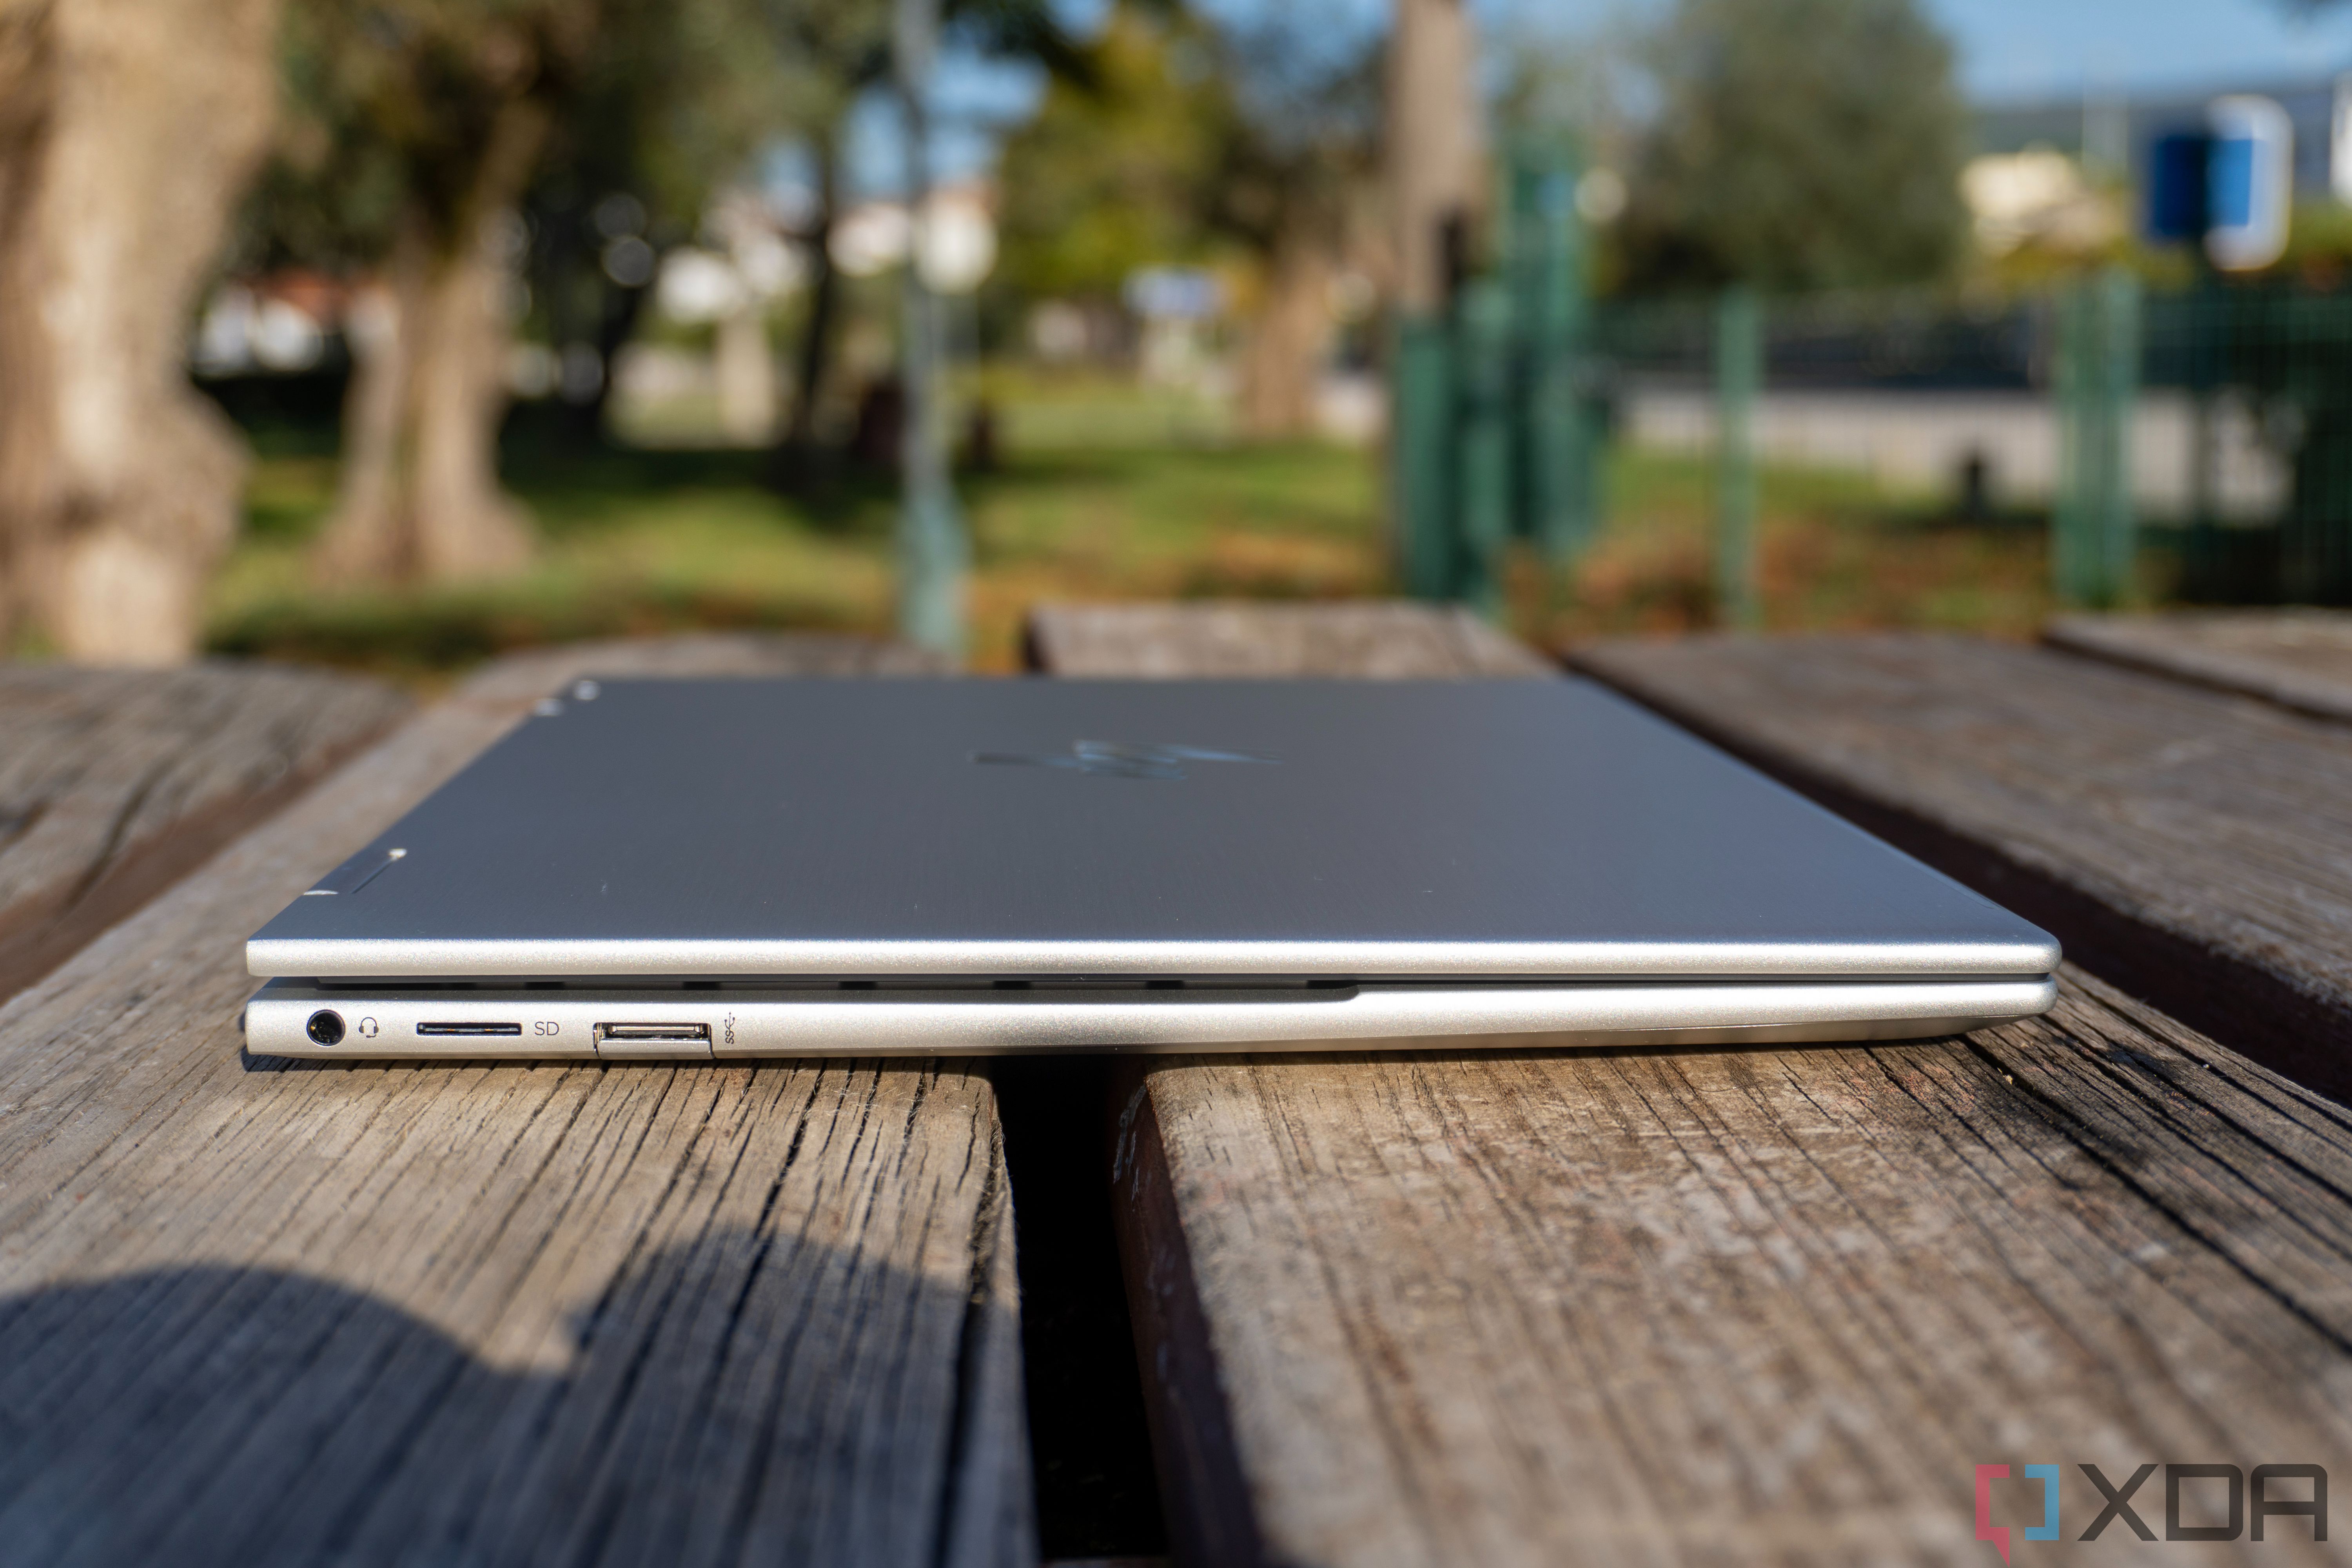 Left-side view of the HP Envy X360 with the lid closed, showing off a headphone jack, microSD card reader, and a USB Type-A port. The laptop is placced on wooden boards and you can see a park in the background